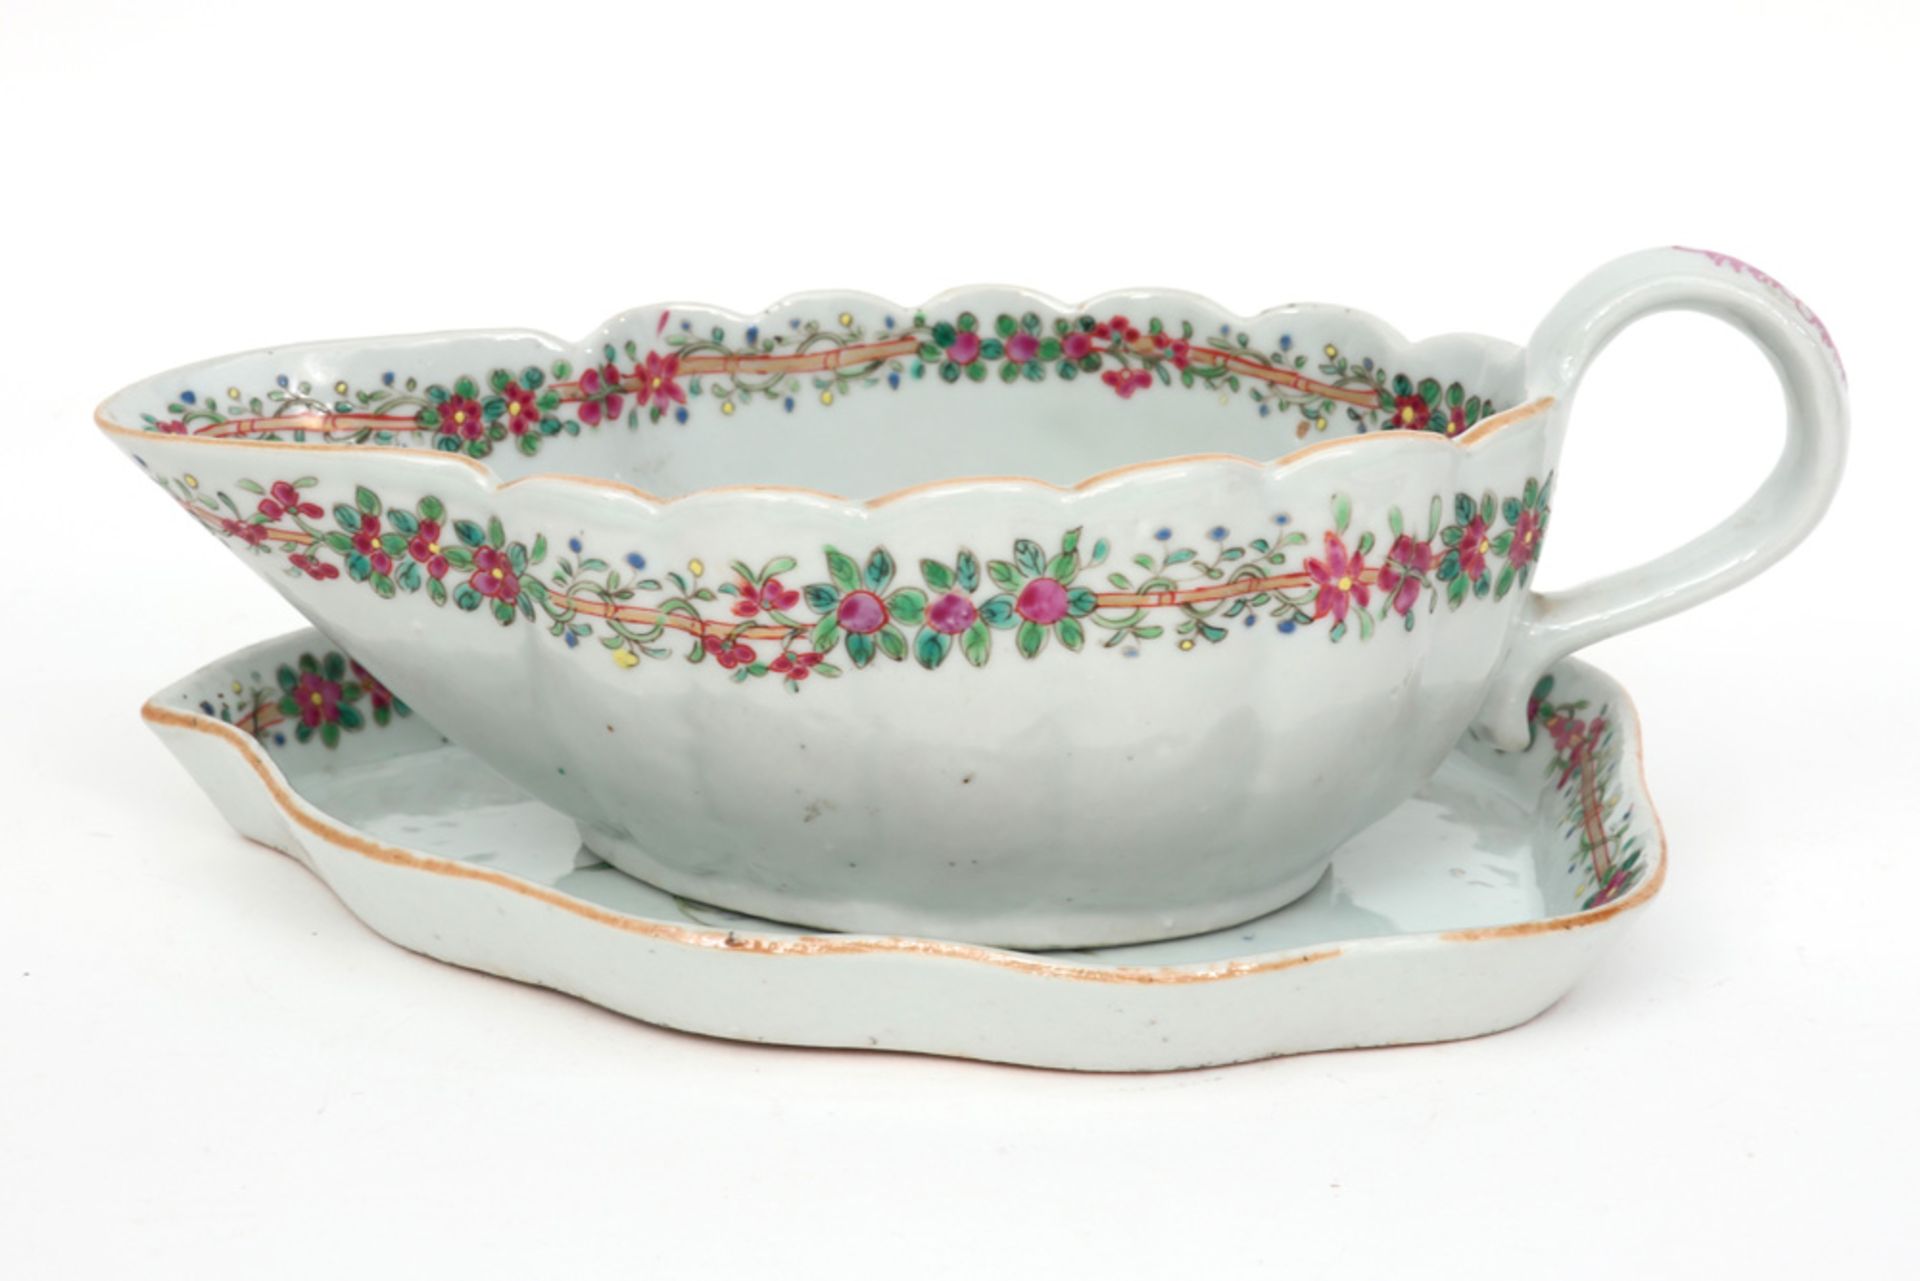 18th Cent. Chinese set of sauce boat and its tray in porcelain with a floral 'Famille Rose' decor || - Image 4 of 4